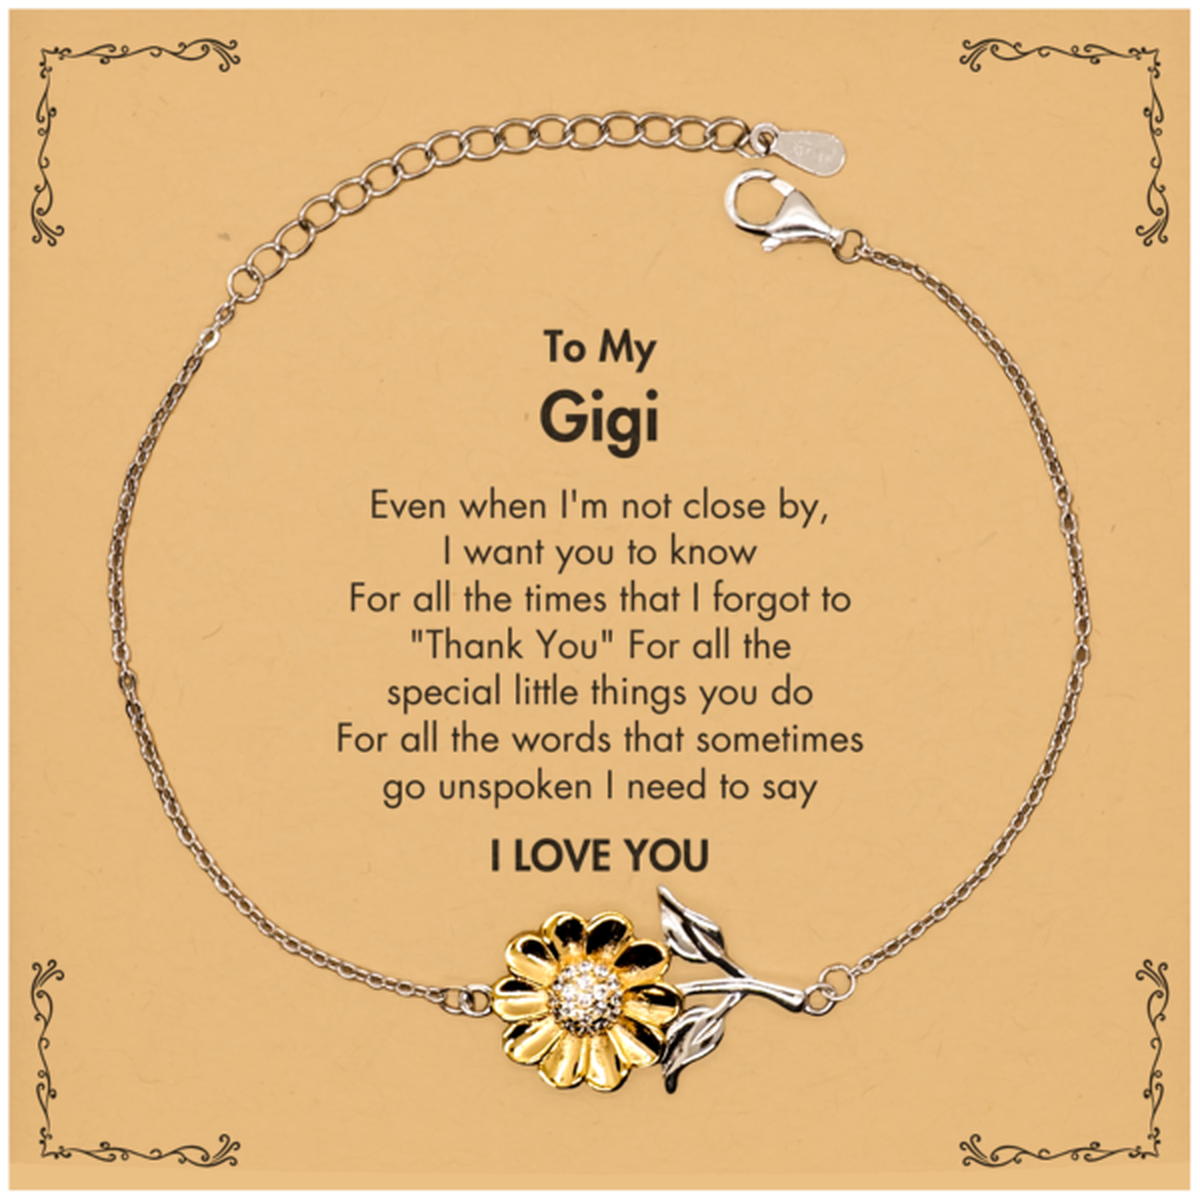 Thank You Gifts for Gigi, Keepsake Sunflower Bracelet Gifts for Gigi Birthday Mother's day Father's Day Gigi For all the words That sometimes go unspoken I need to say I LOVE YOU